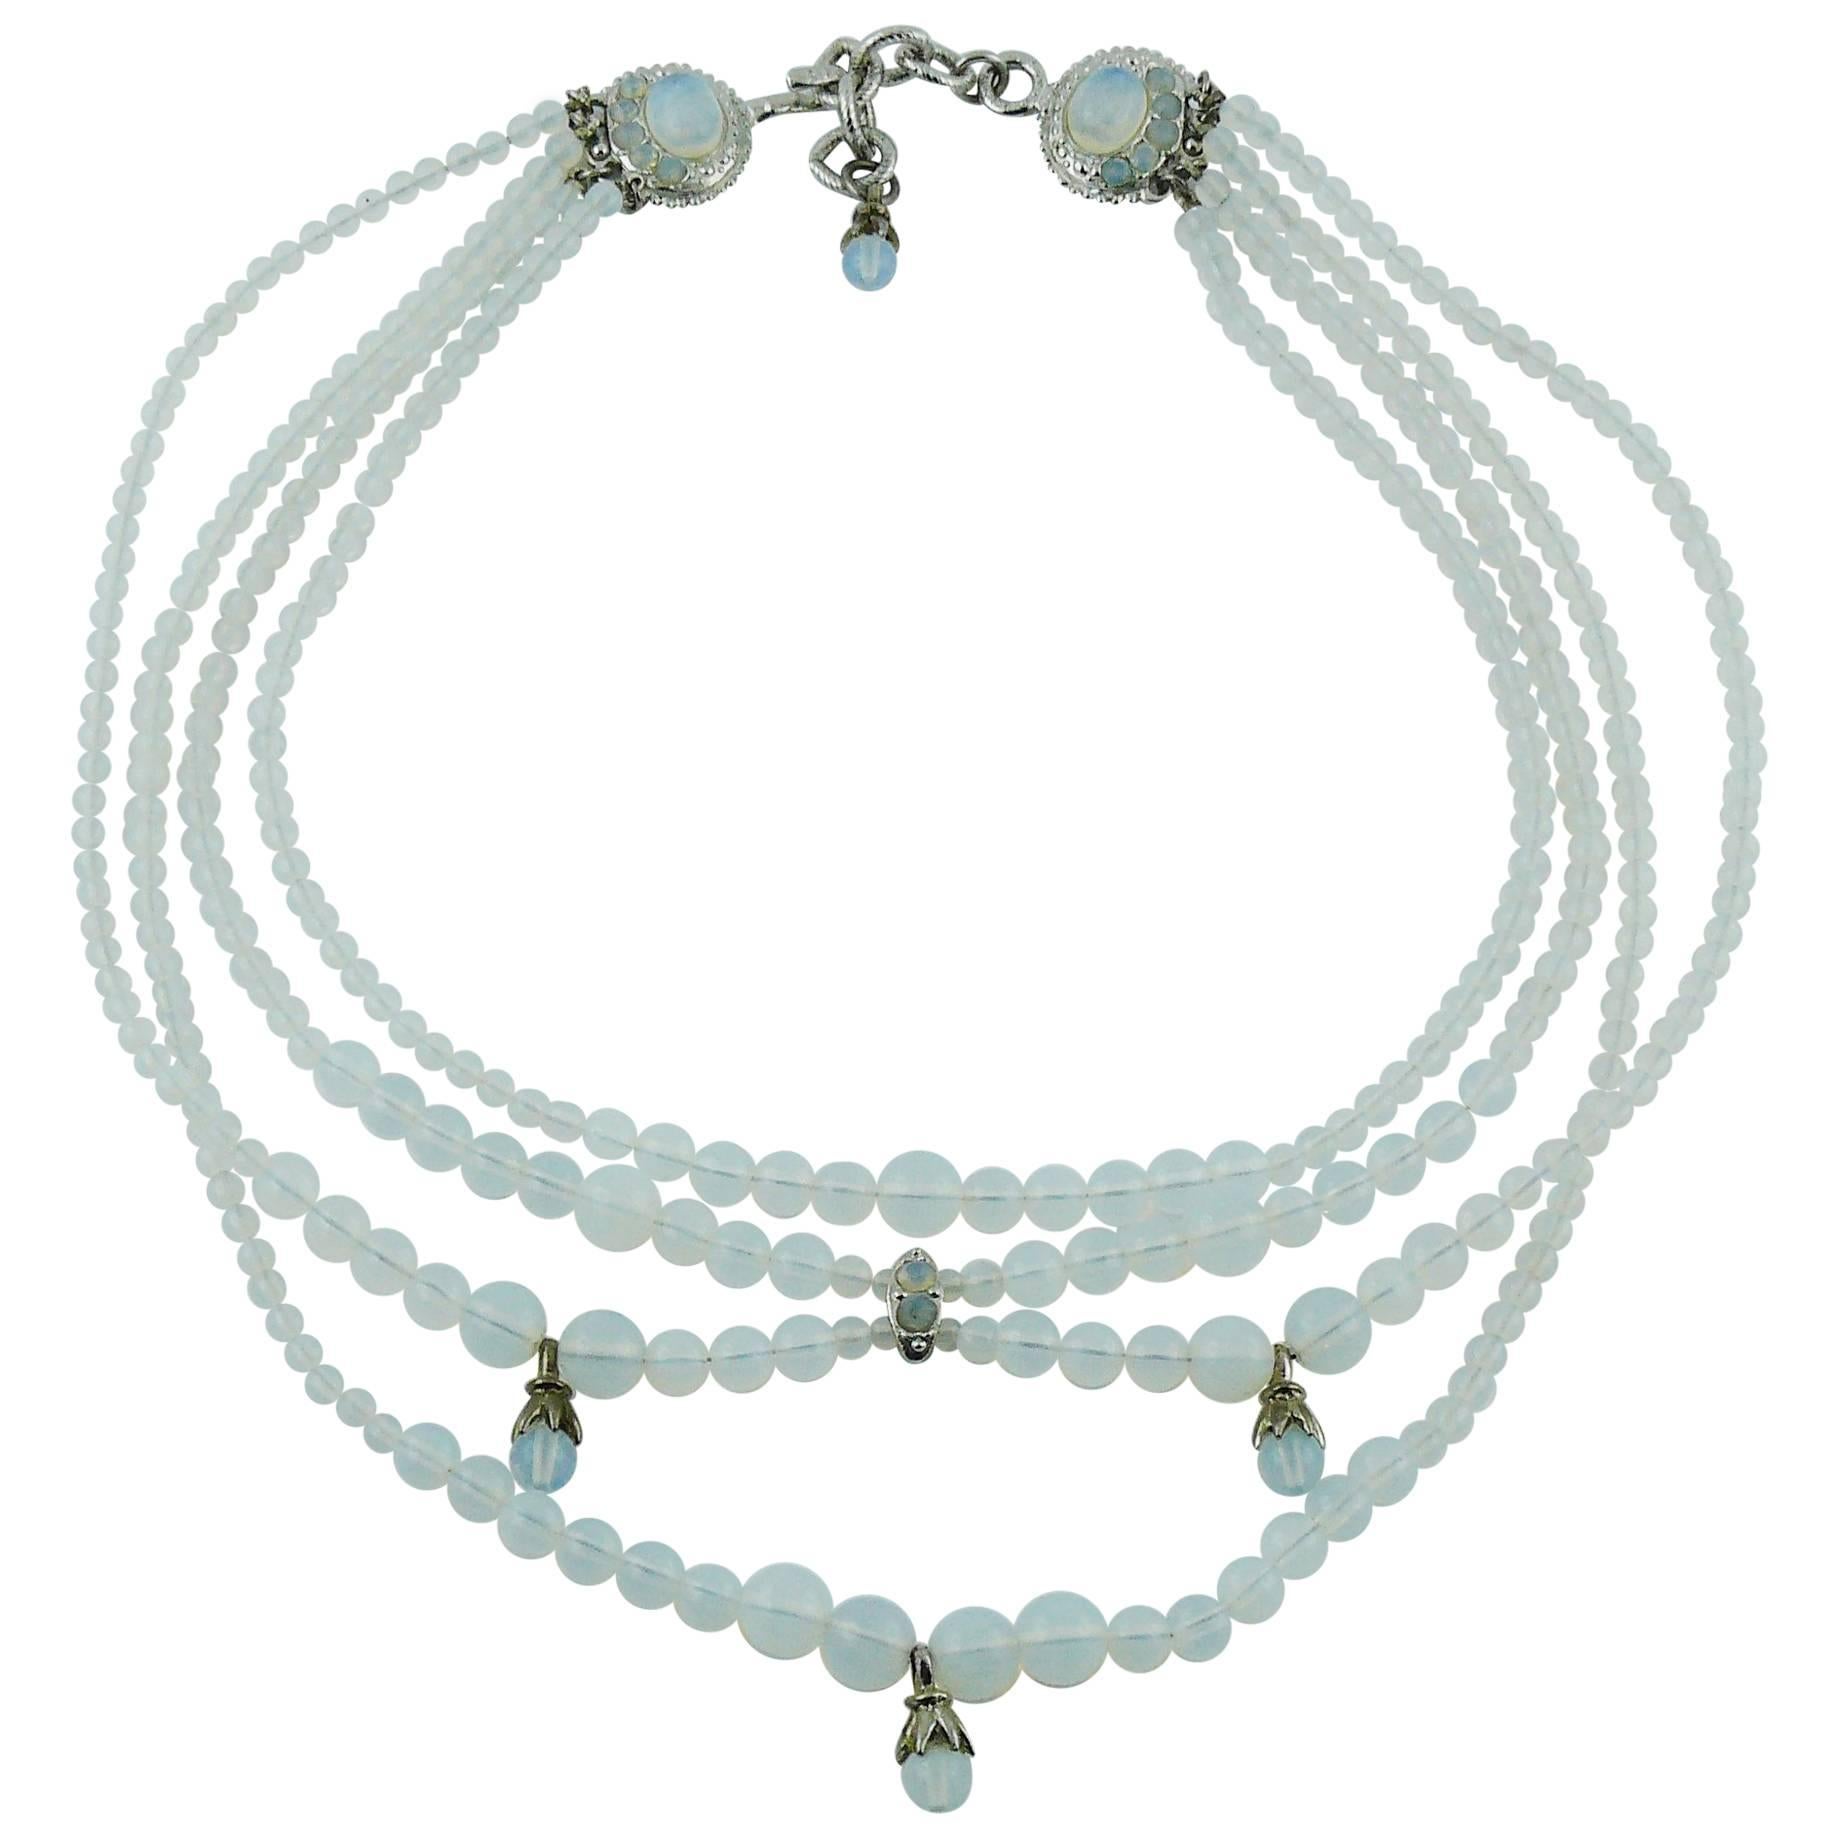 Christian Dior Opalescent Drapery Necklace